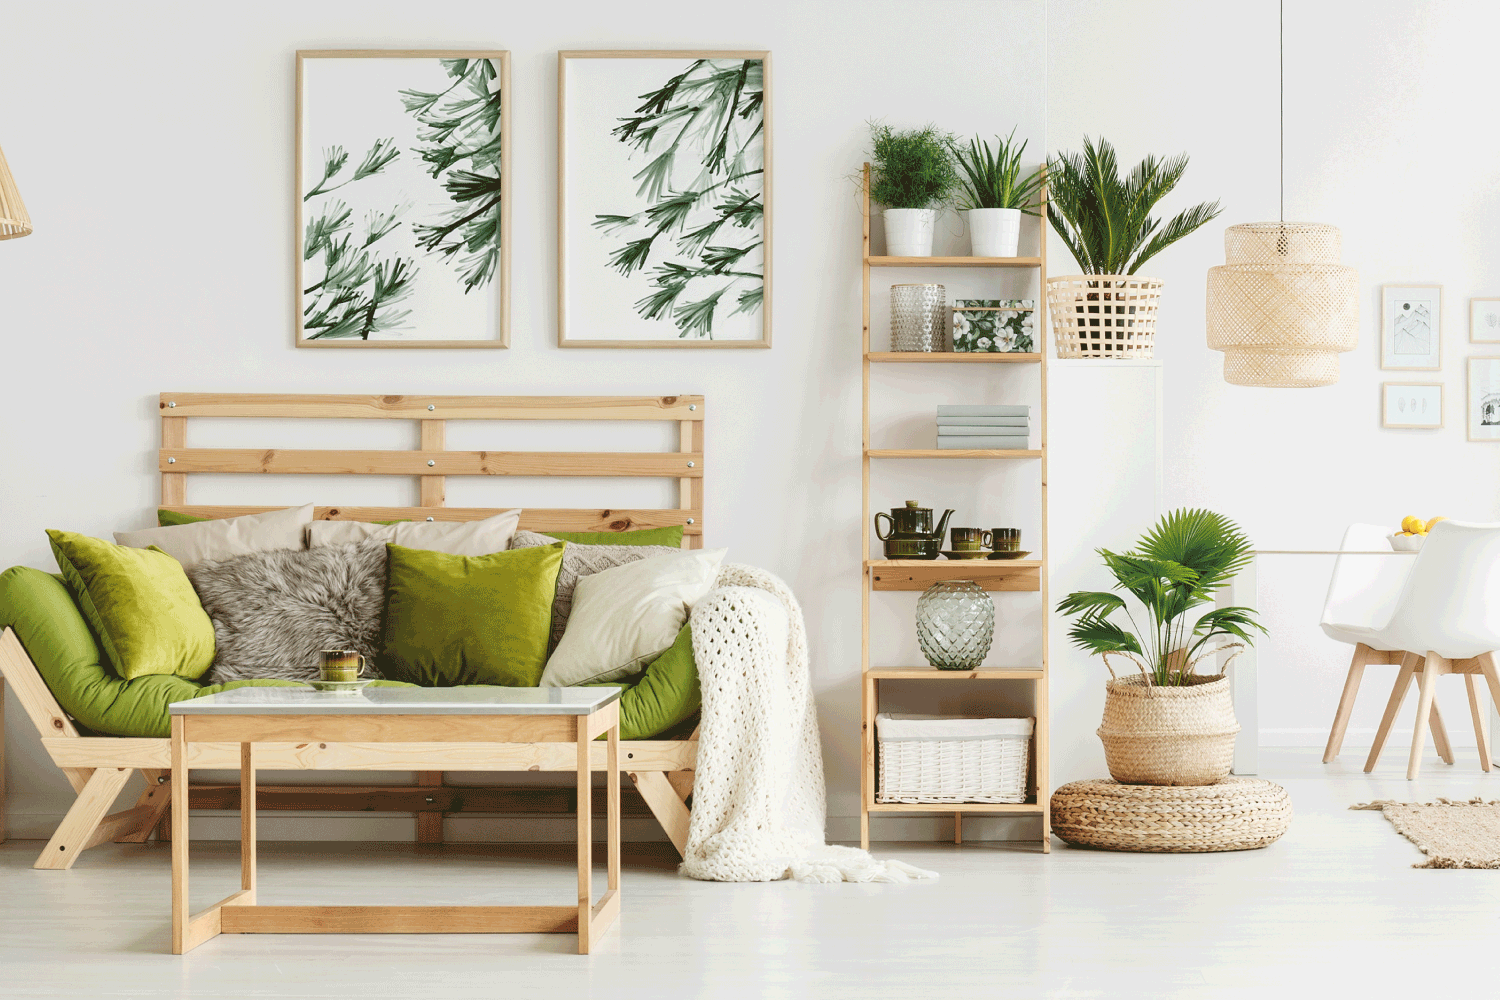 Leaves posters on white wall above green settee with pillows and blanket in spacious living room interior with plants, lime accent